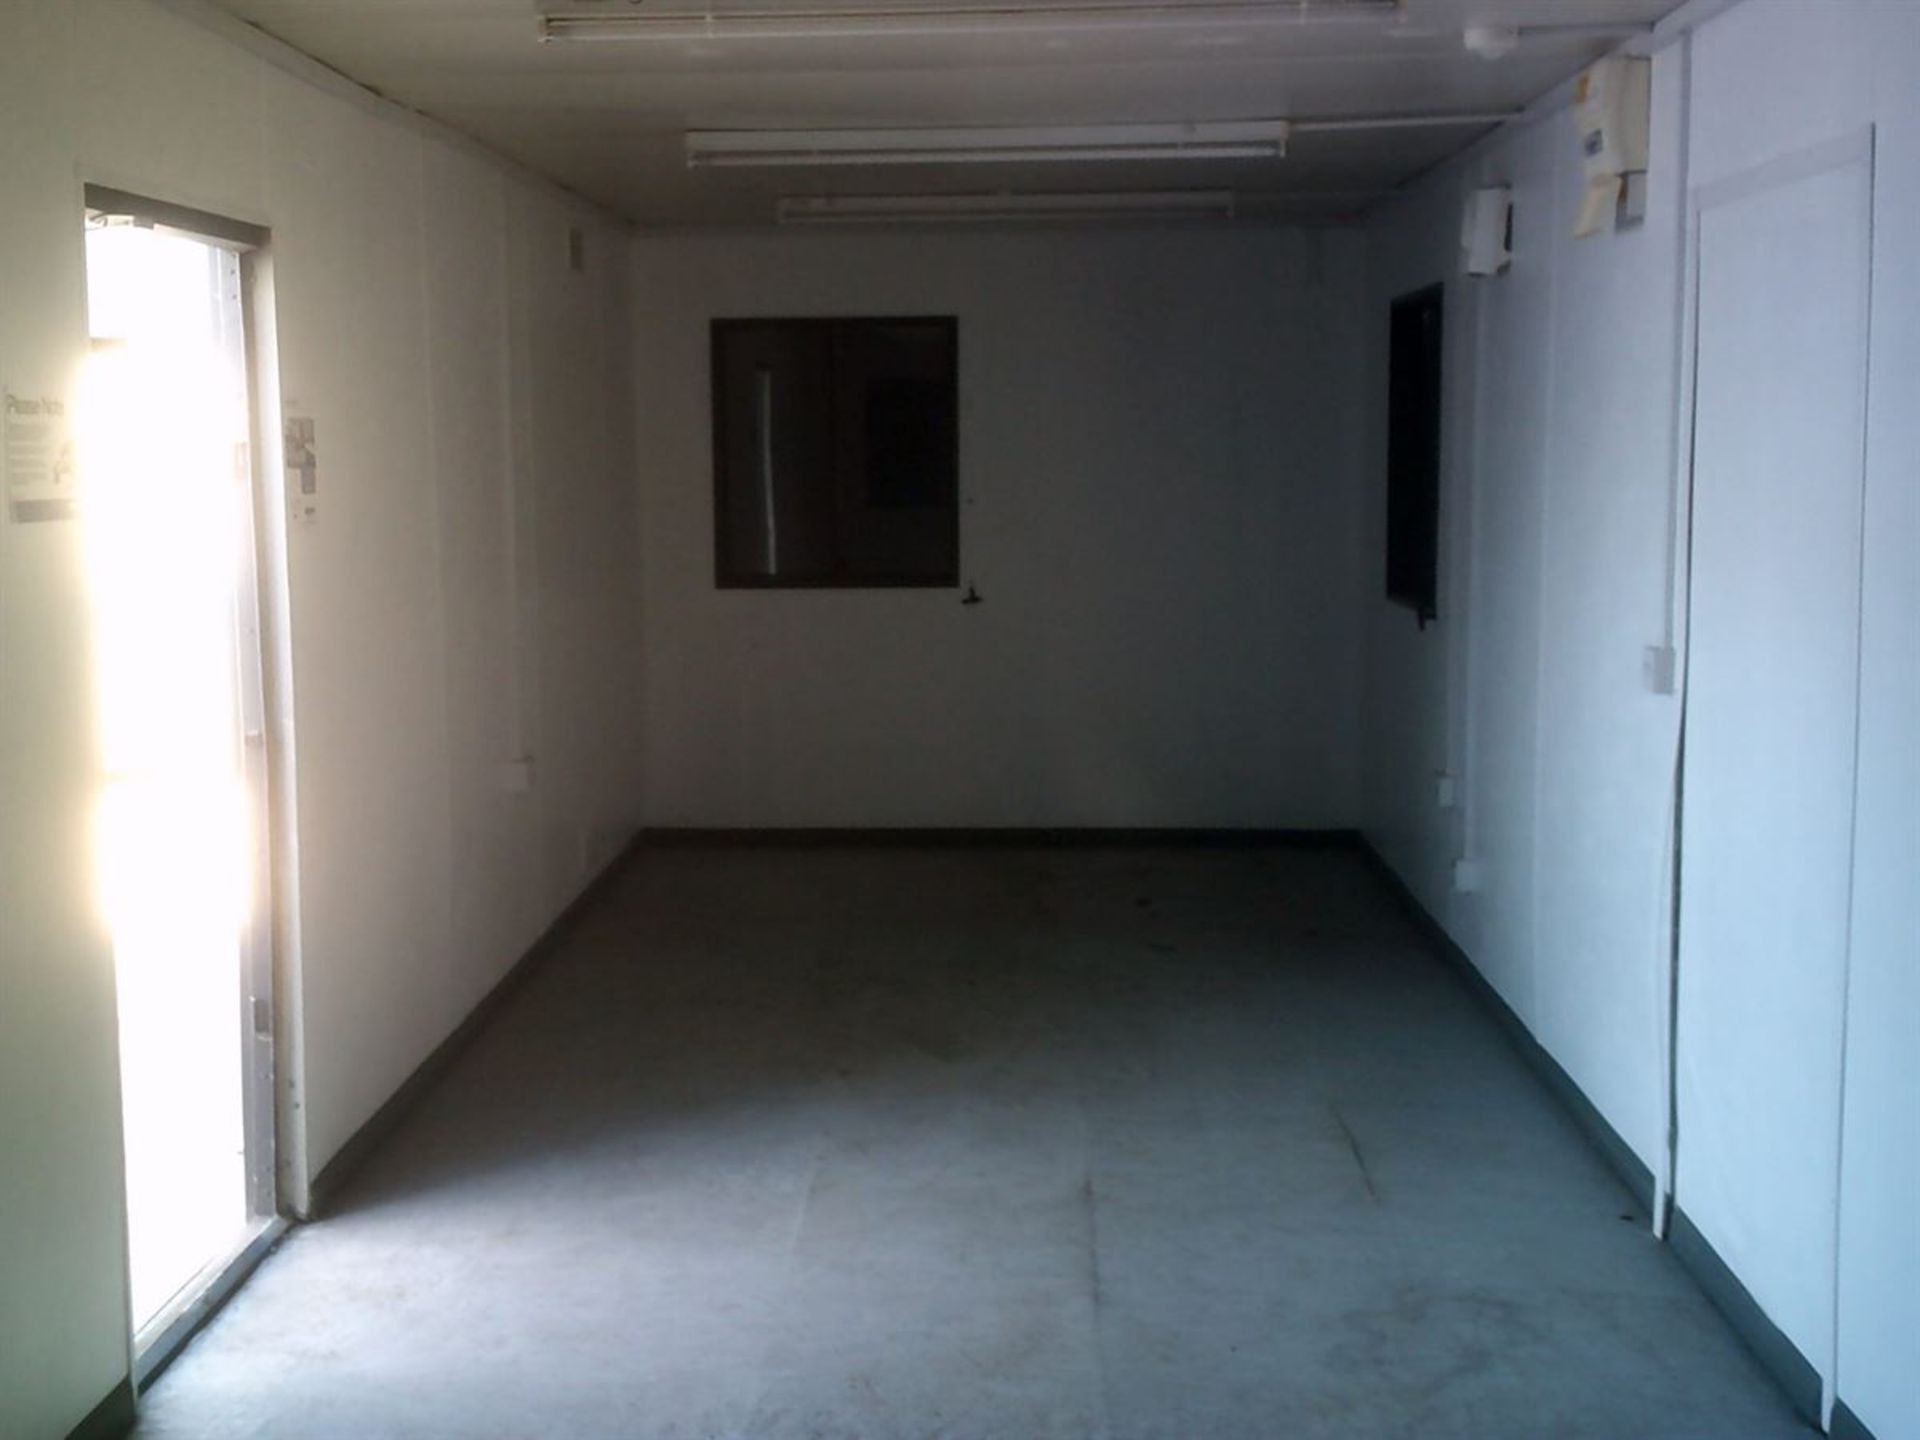 ESP13727 32ft x 10ft Anti-Vandal Canteen/Changing Room - Image 4 of 5